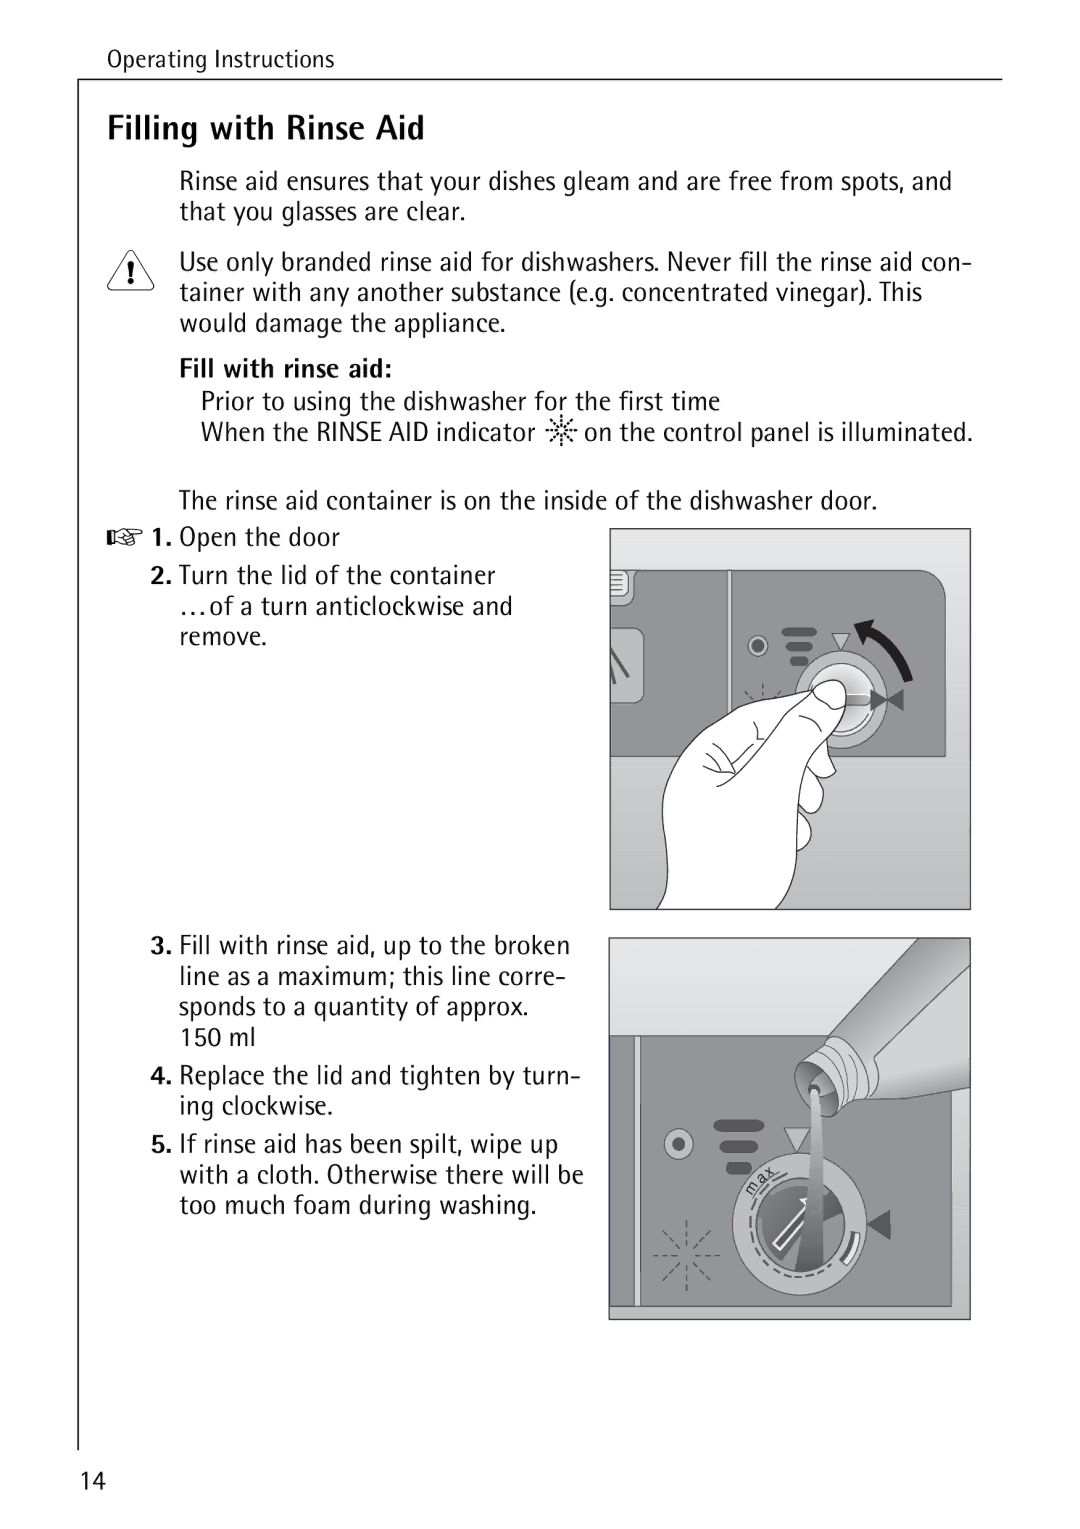 AEG 5270 I manual Filling with Rinse Aid, That you glasses are clear, Would damage the appliance, Fill with rinse aid 